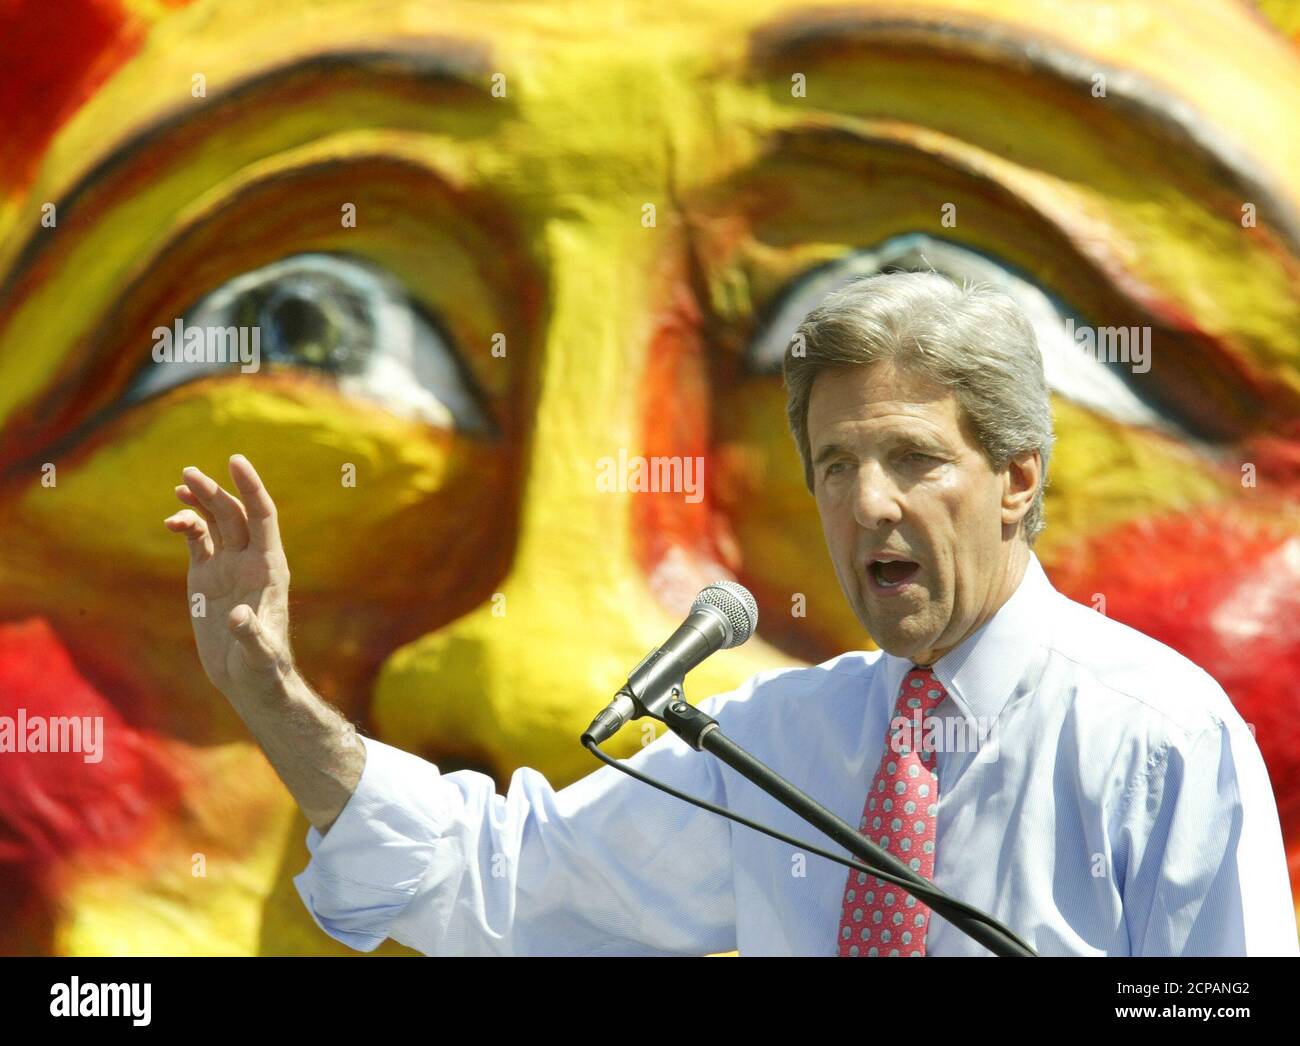 U.S. Democratic Presidential candidate, Senator John Kerry (D-Ma), makes a campaign speech in front of a paper mache California sun at Woodrow Wilson High School in Los Angeles, California May 5, 2004. REUTERS/Lucy Nicholson US ELECTION  LN Stock Photo